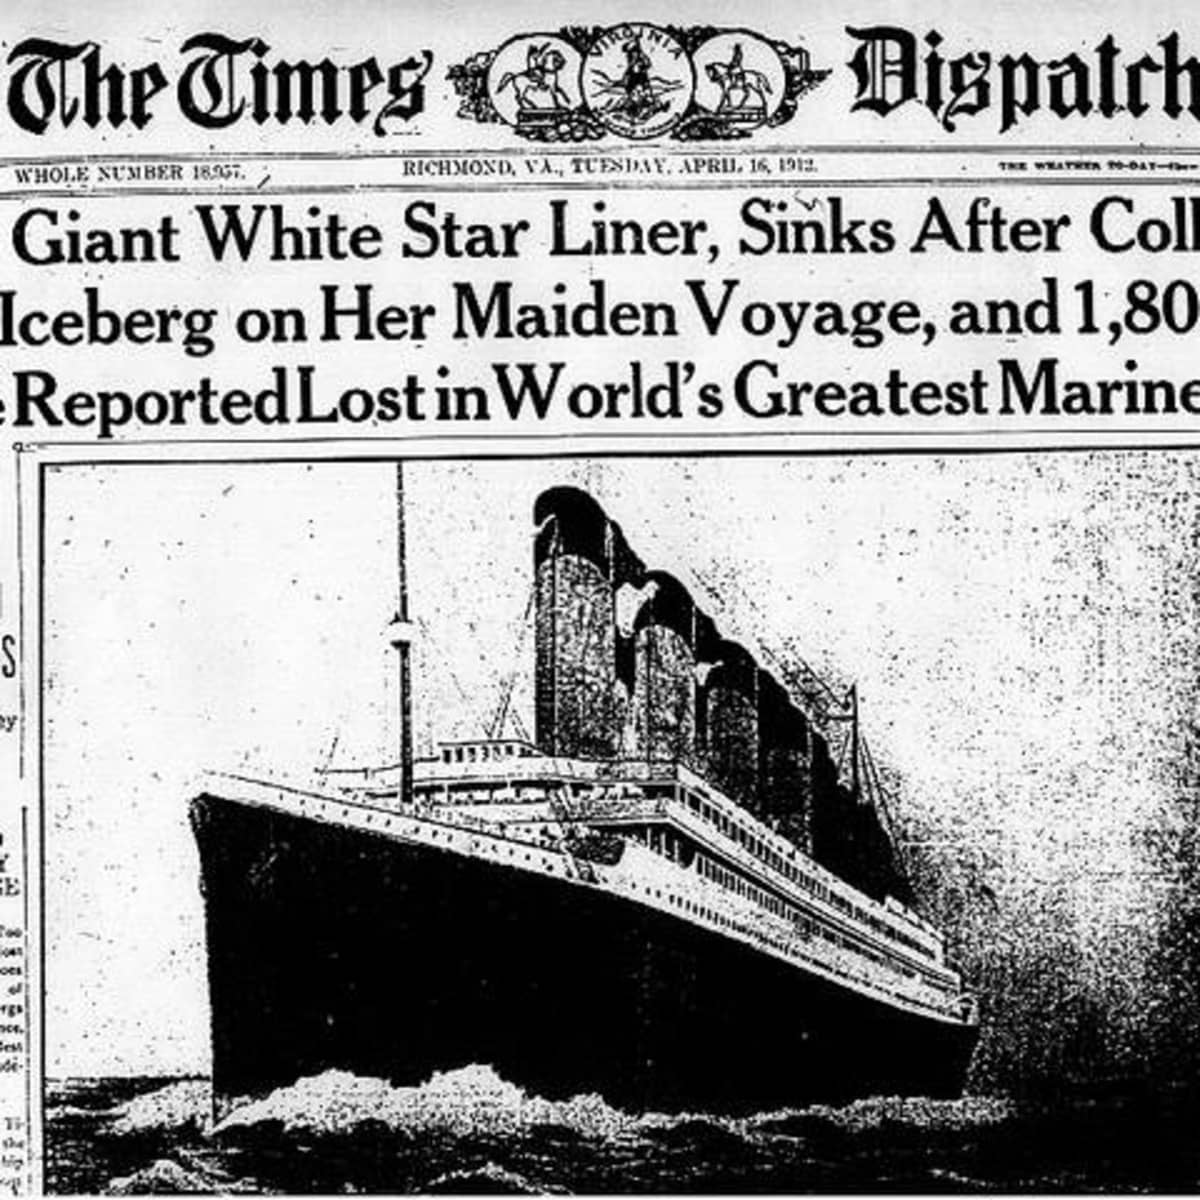 Why were the Titanic's passengers divided into three separate